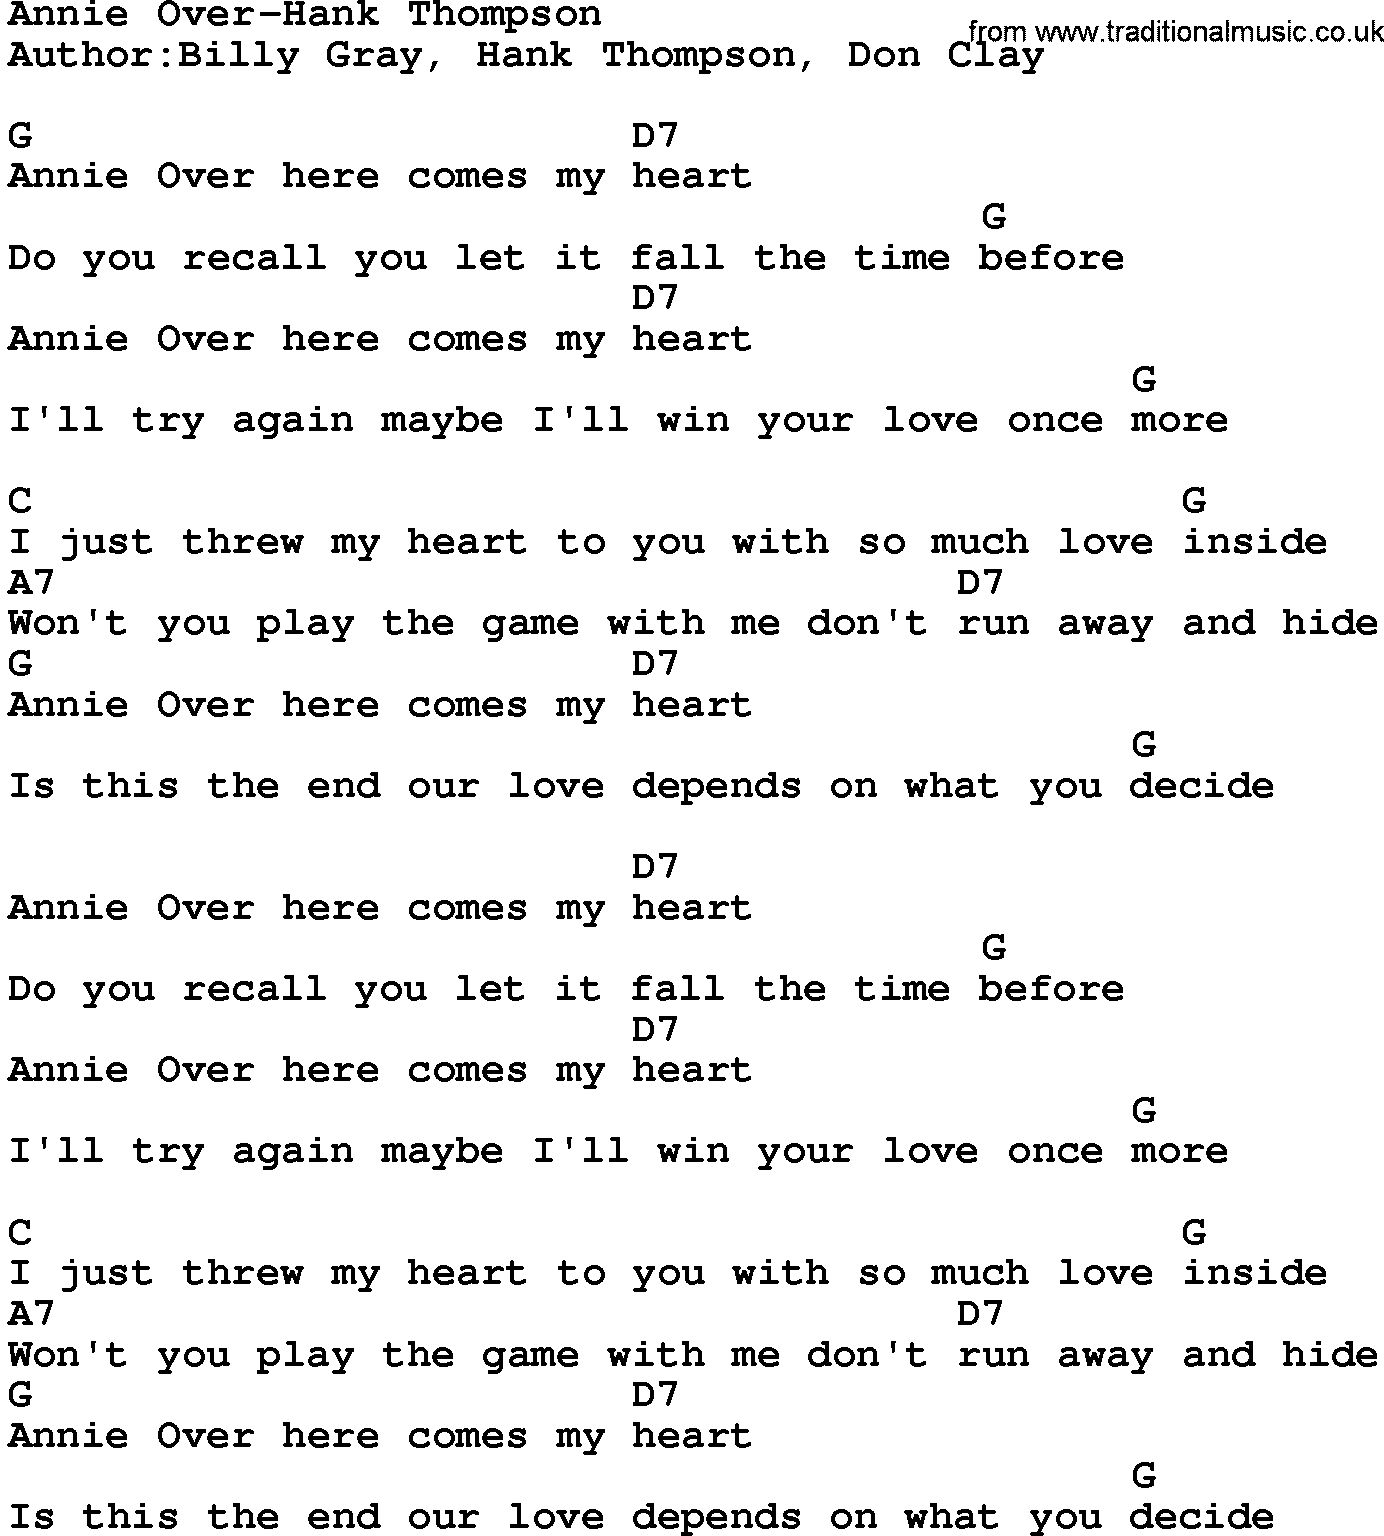 Country music song: Annie Over-Hank Thompson lyrics and chords